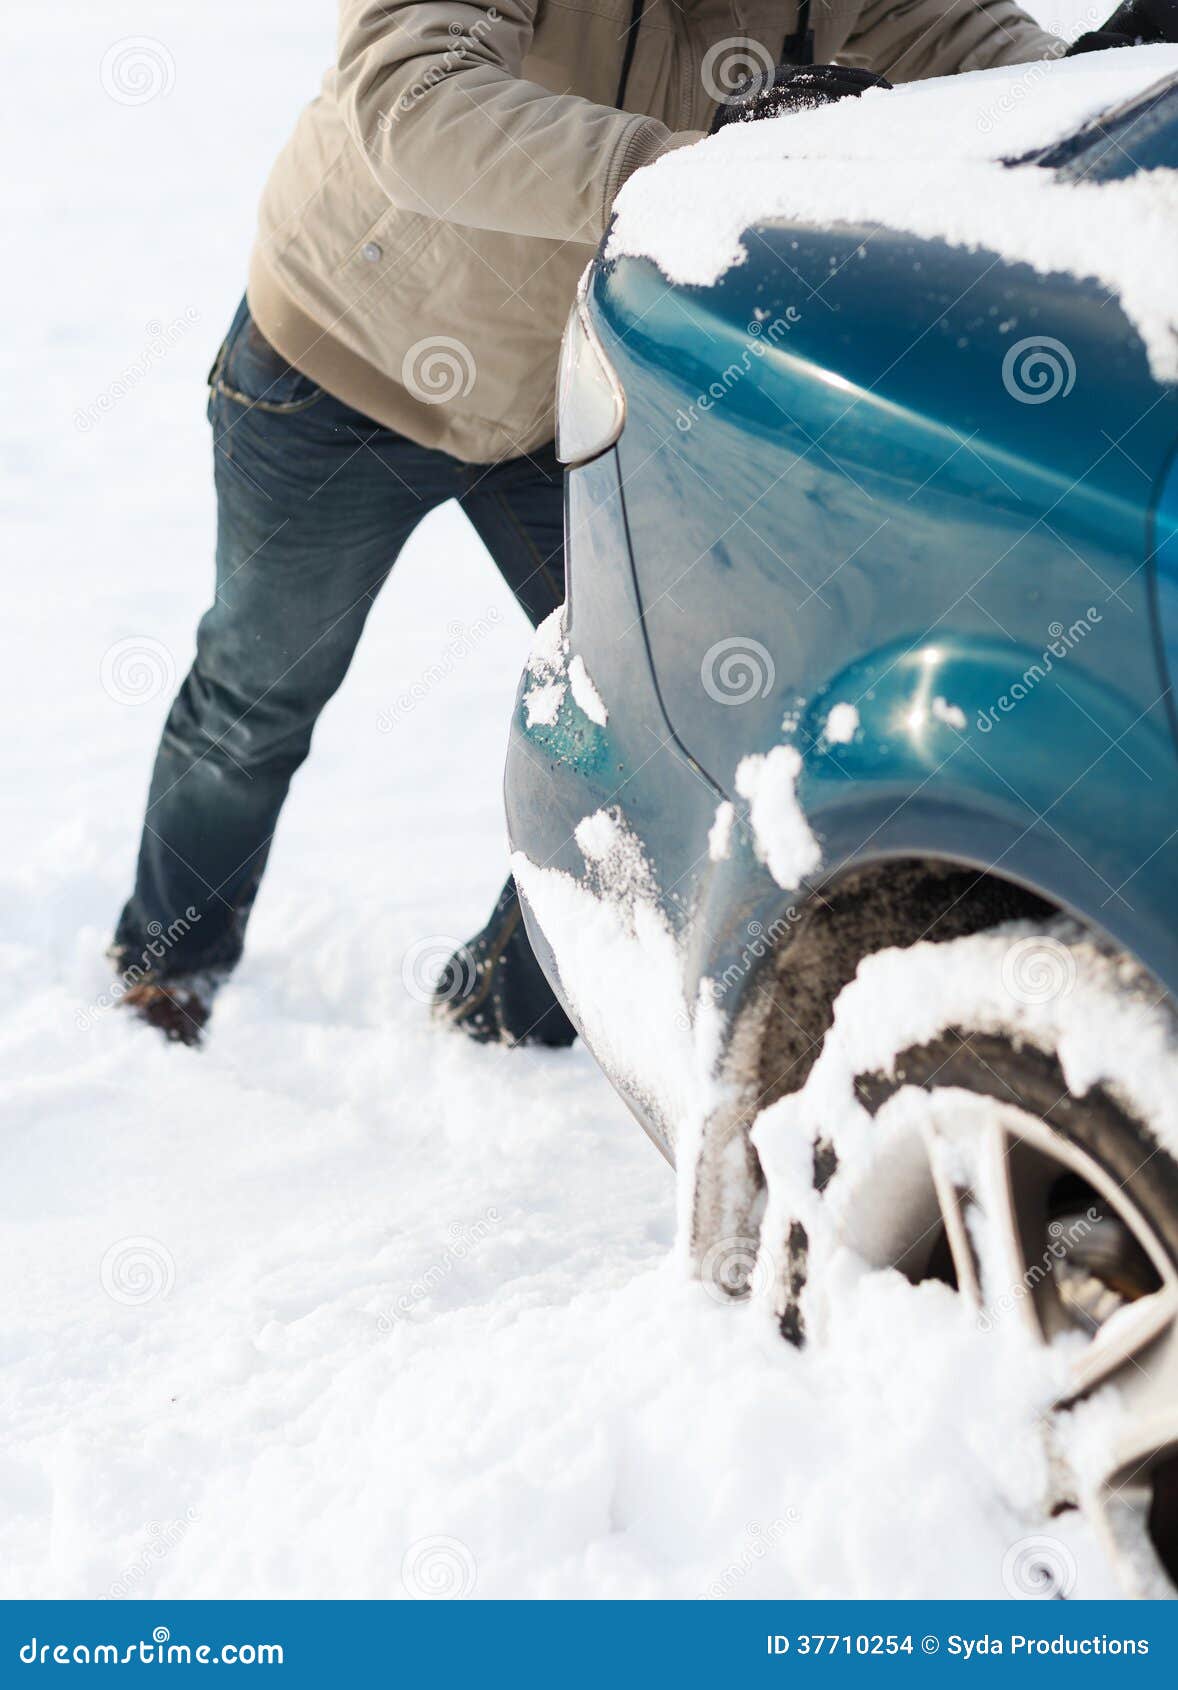 clipart car stuck in snow - photo #26